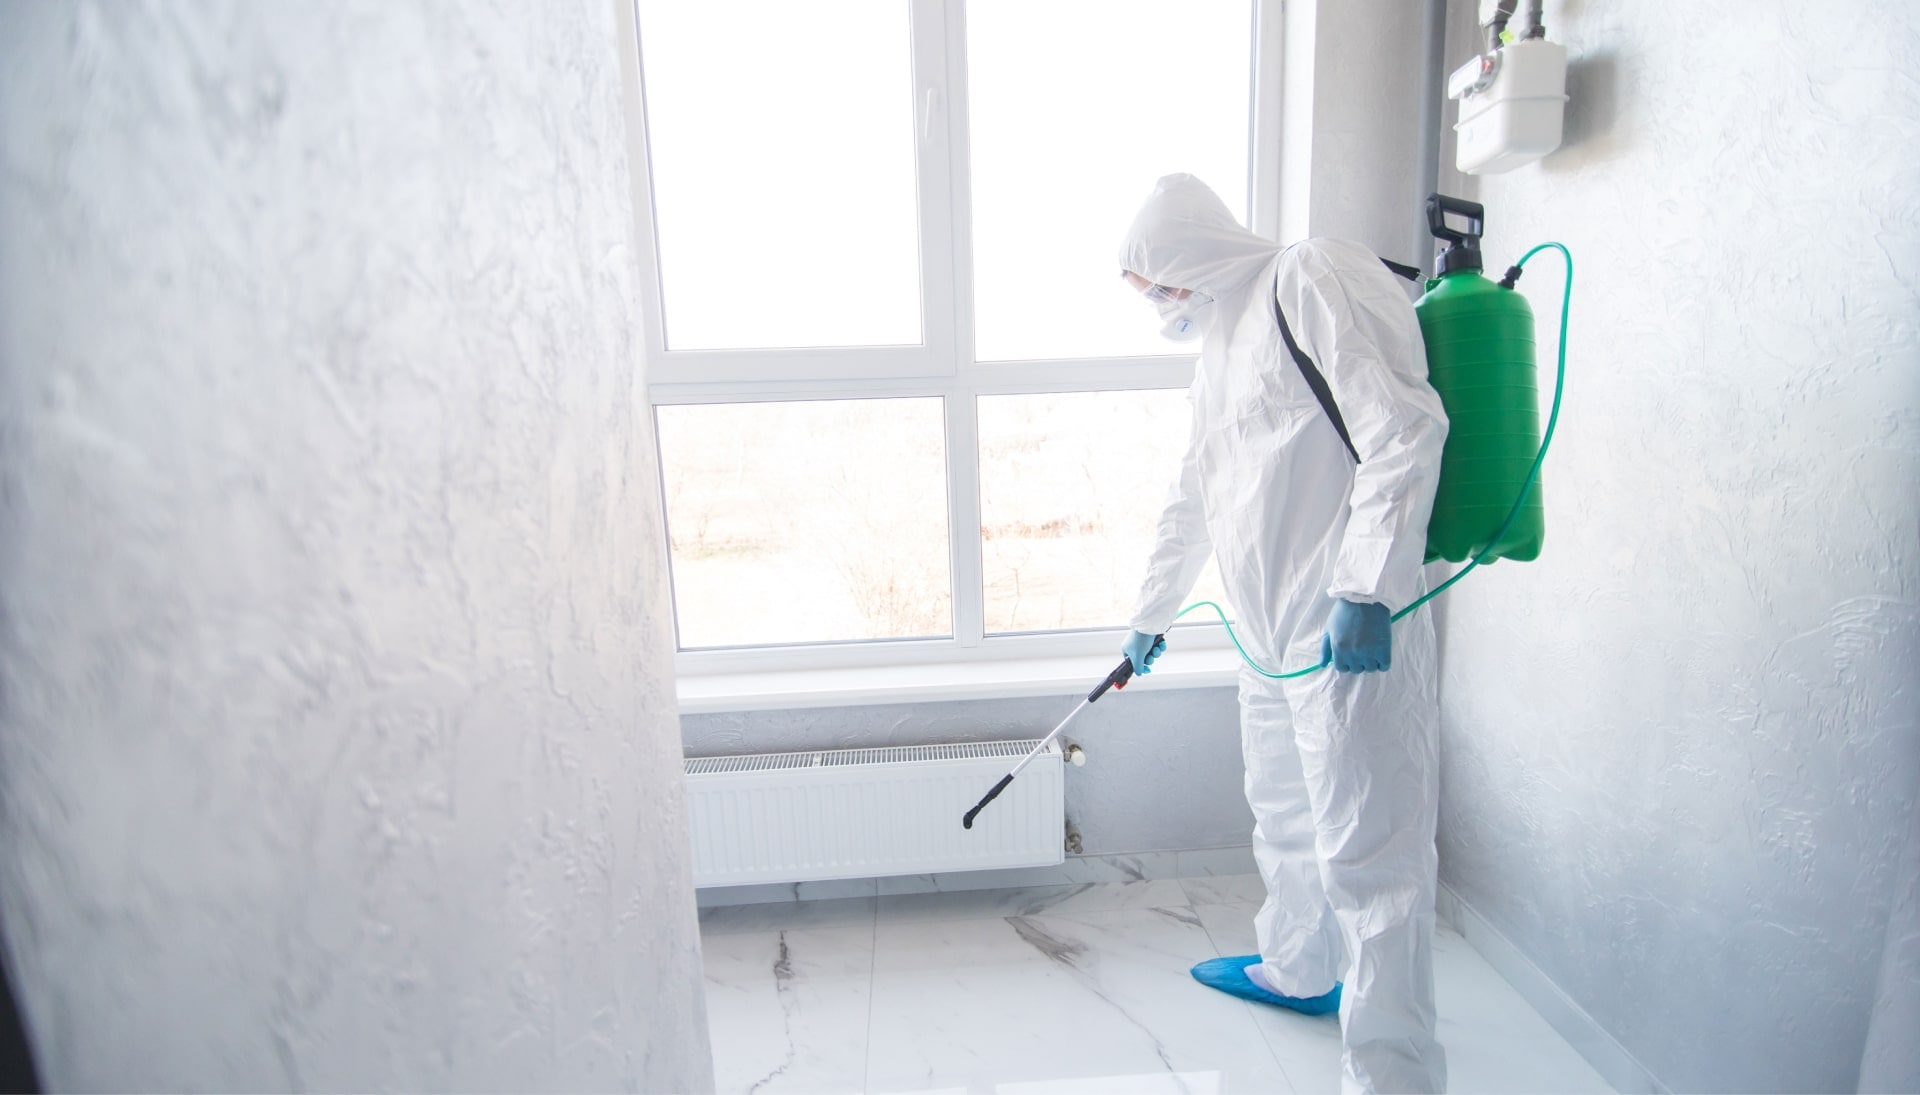 We provide the highest-quality mold inspection, testing, and removal services in the Castle Rock, Colorado area.